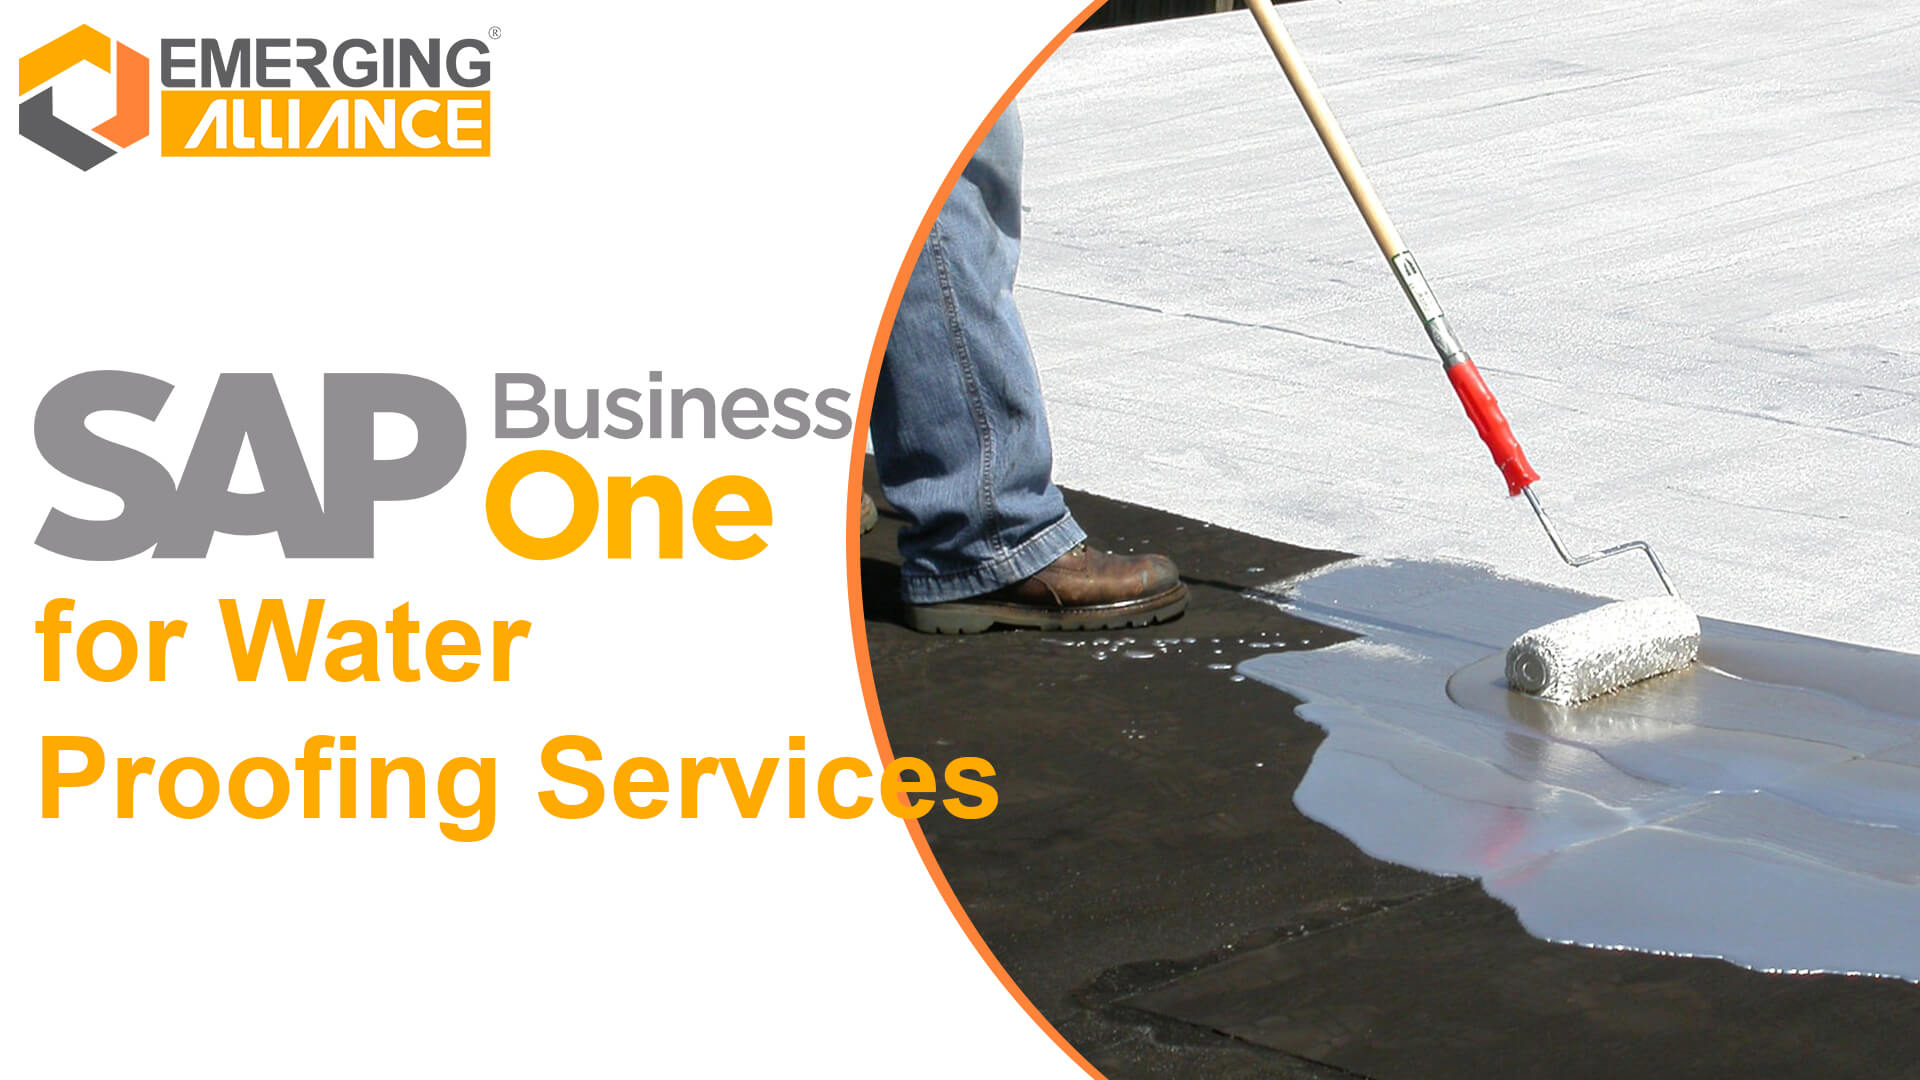 sap business one for water proofing services